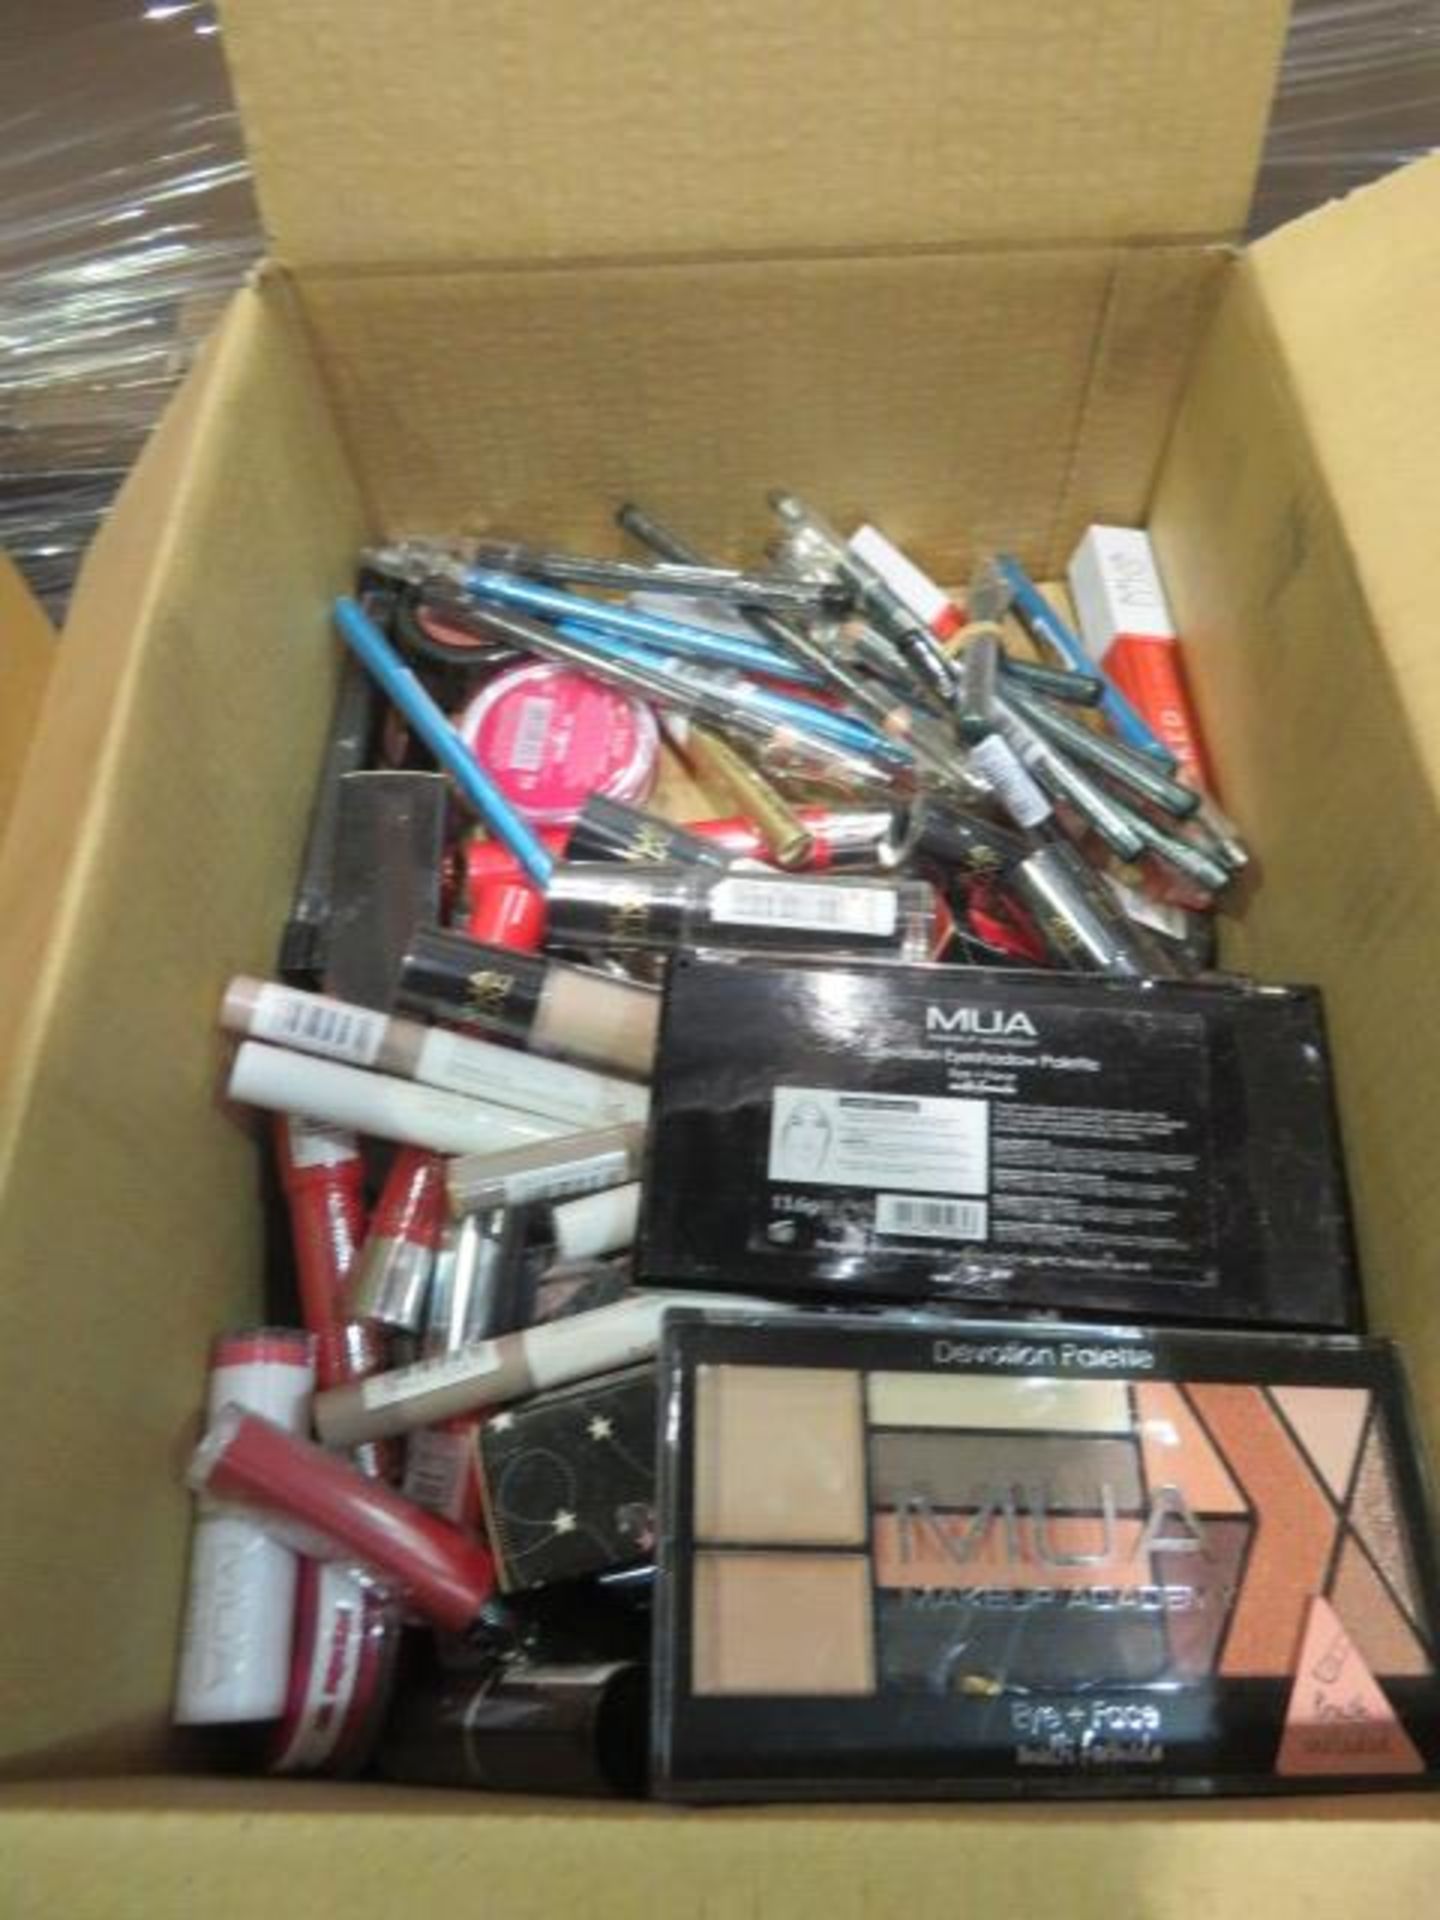 (Z32) Circa. 200 items of various new make up acadamy make up to include: devolution eyeshadow ... - Image 3 of 3